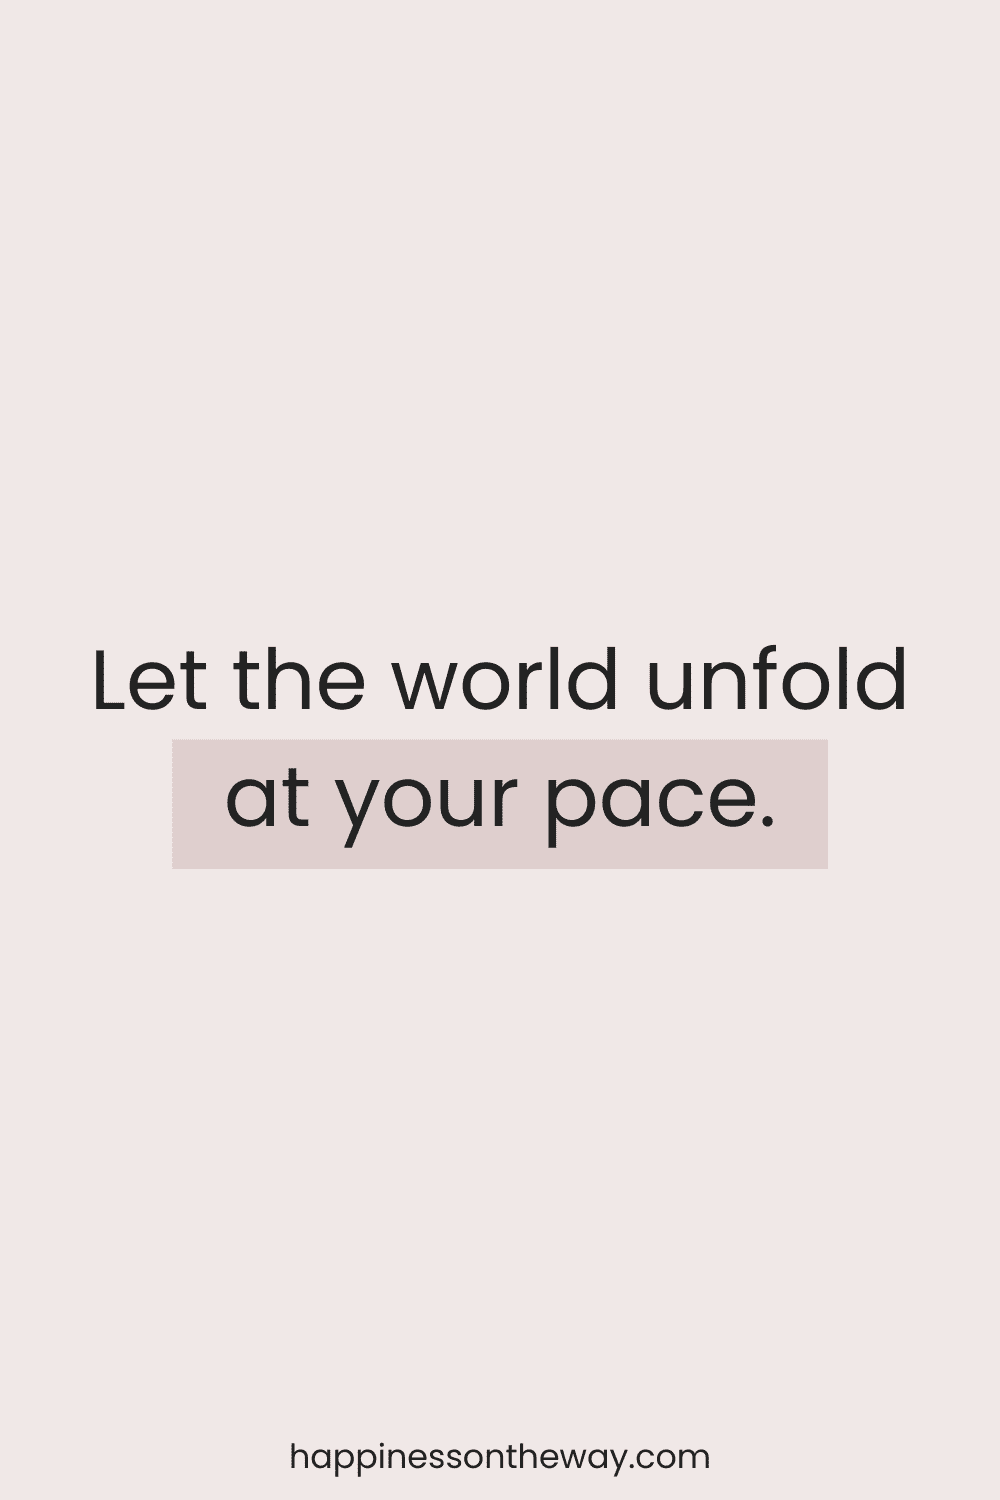 Slow Travel Quote: 'Let the world unfold at your pace.' presented in a minimalist style on a pastel backdrop